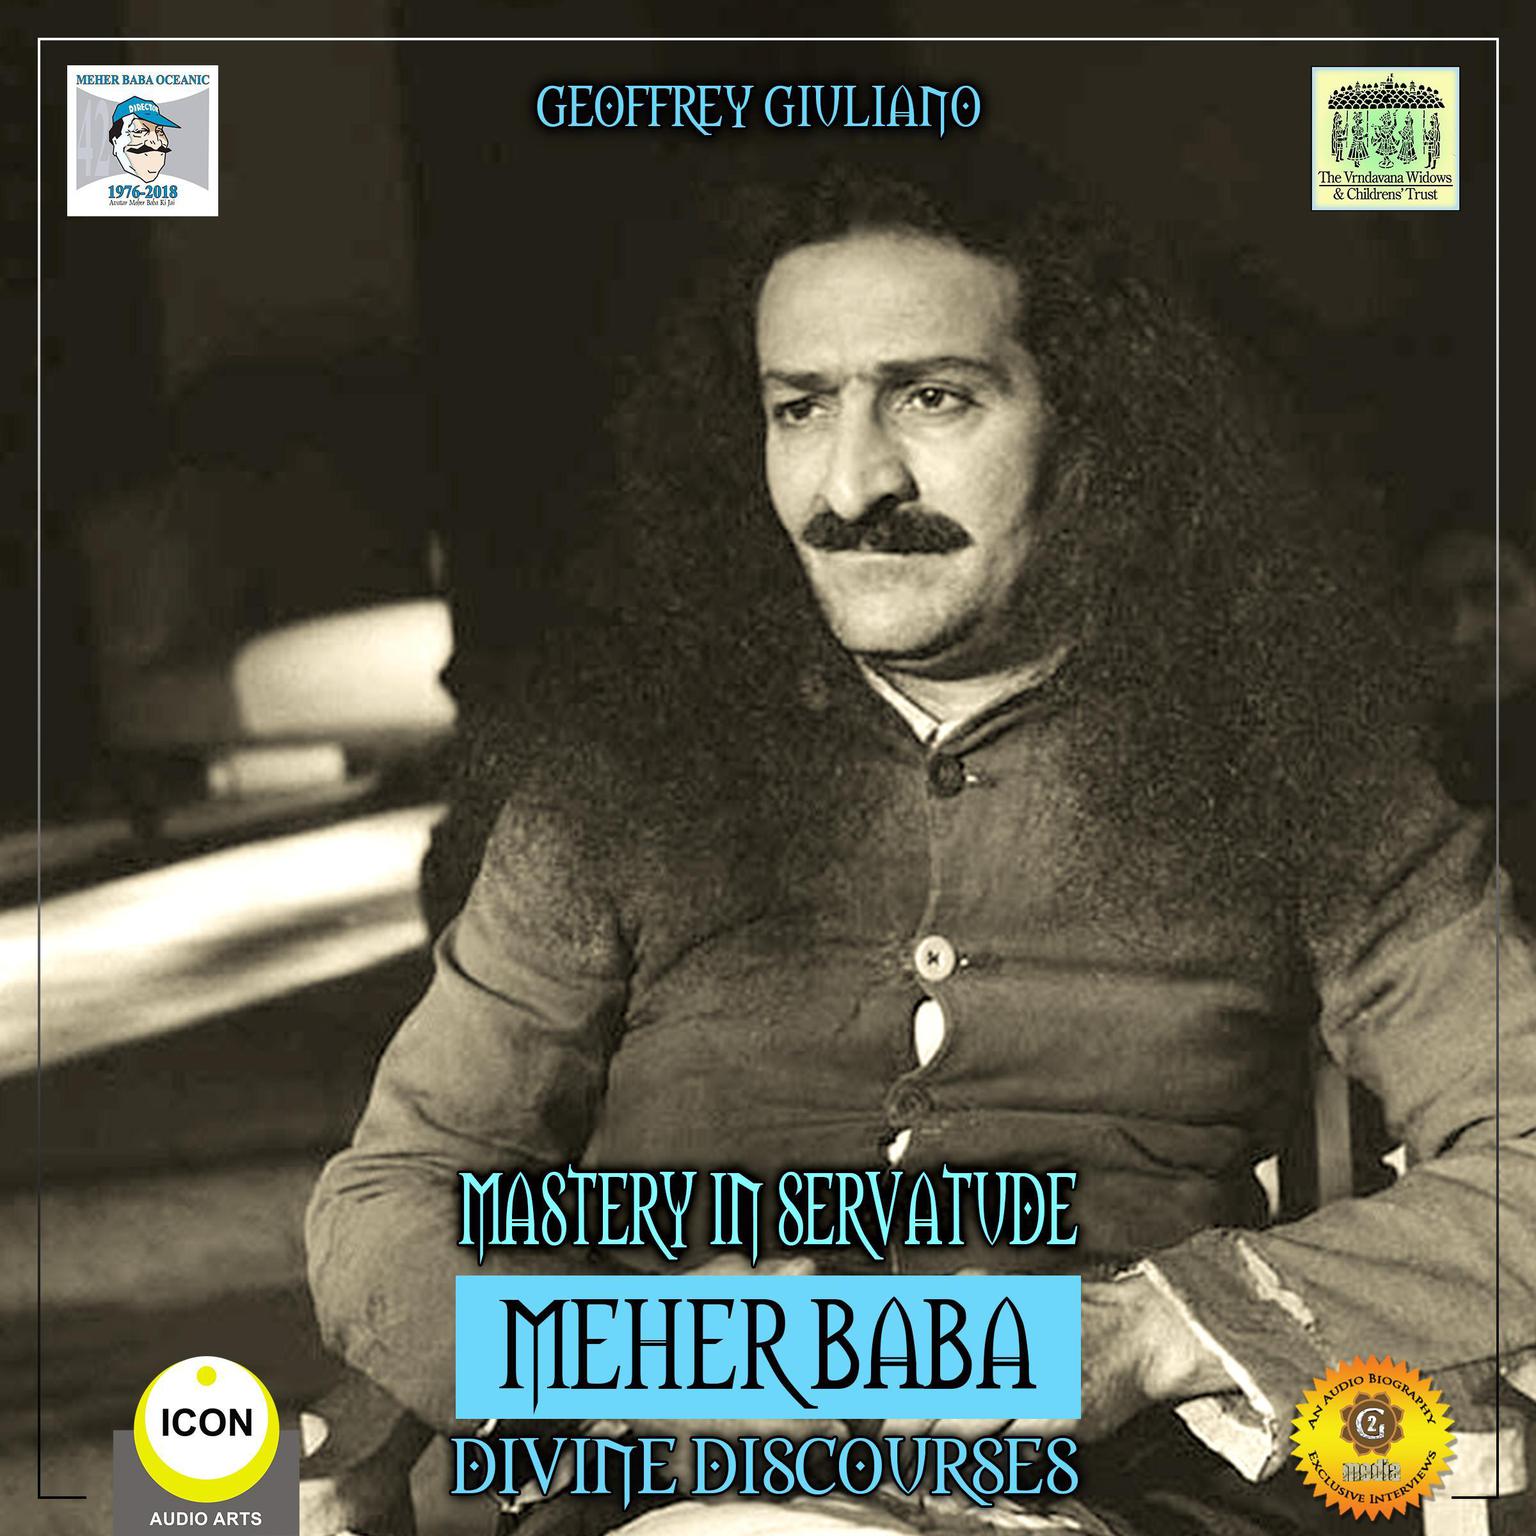 Mastery in Servatude Meher Baba - Divine Discourses Audiobook, by Geoffrey Giuliano